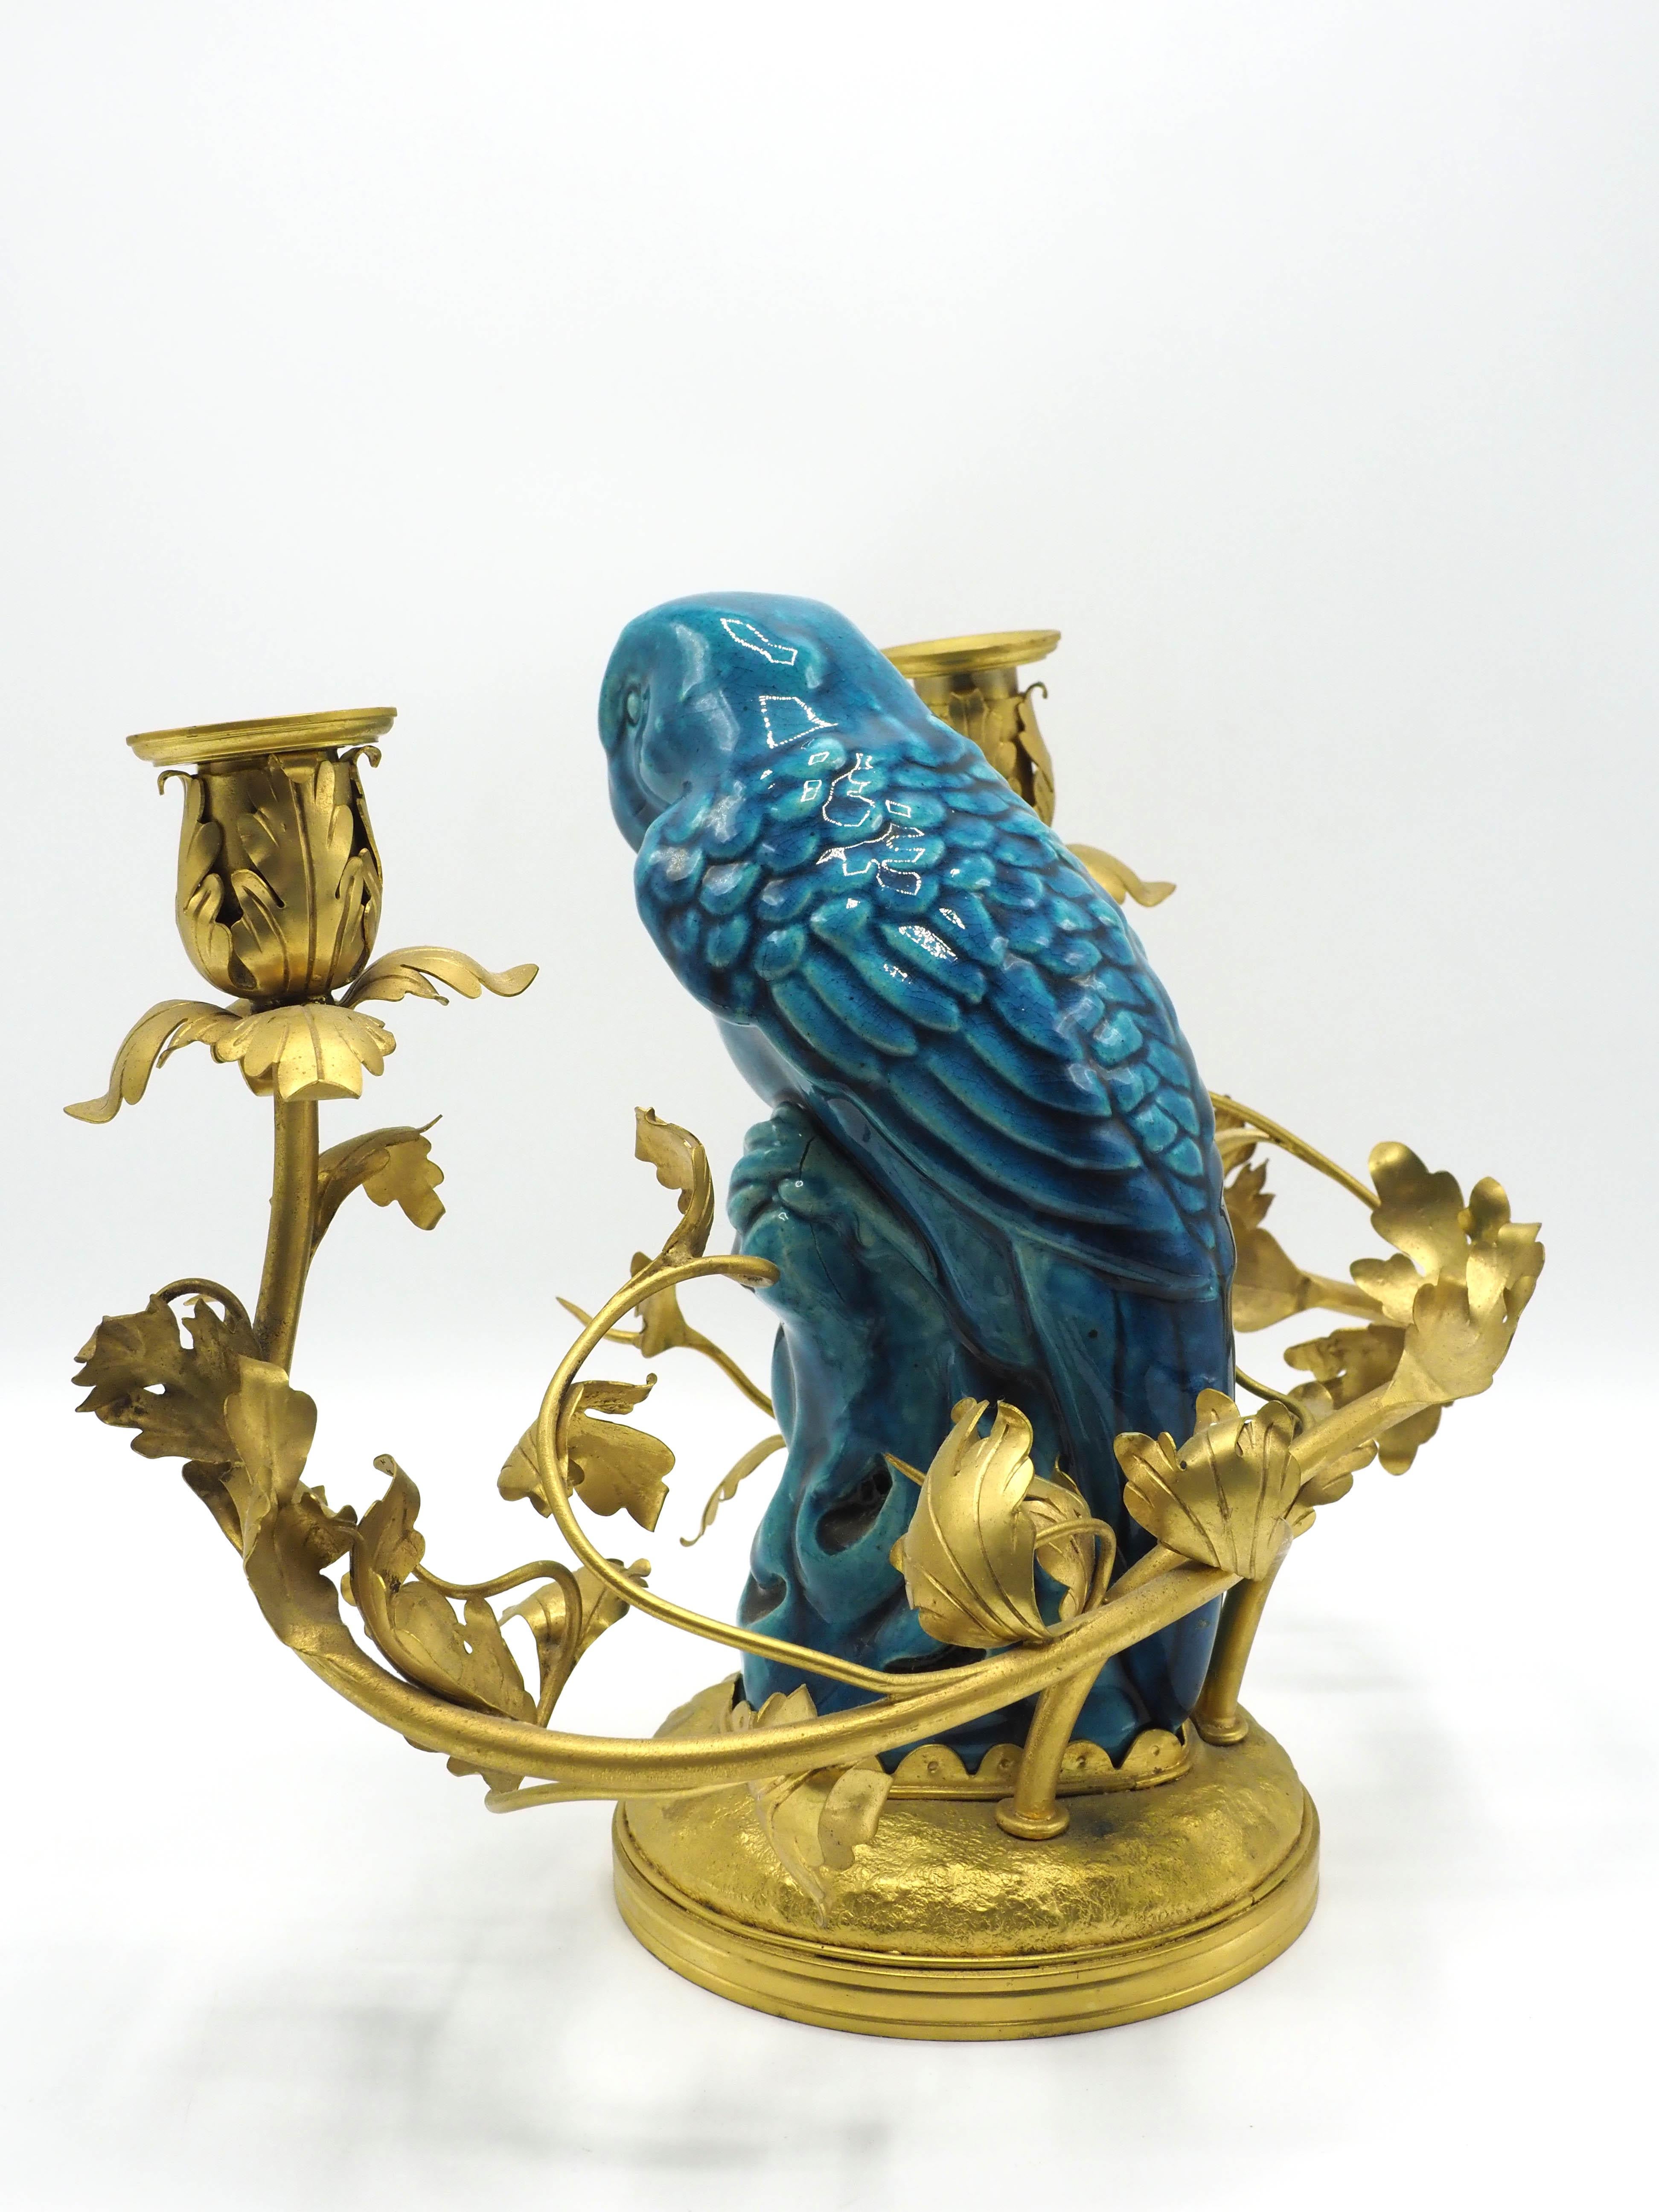 Original 20th-century Chinese chandelier in gilded bronze and blue porcelain.

Produced during the 20th century, this original Chinese chandelier has 2 components: the flower-shaped main structure is made of gilded bronze, while the parrot-shaped